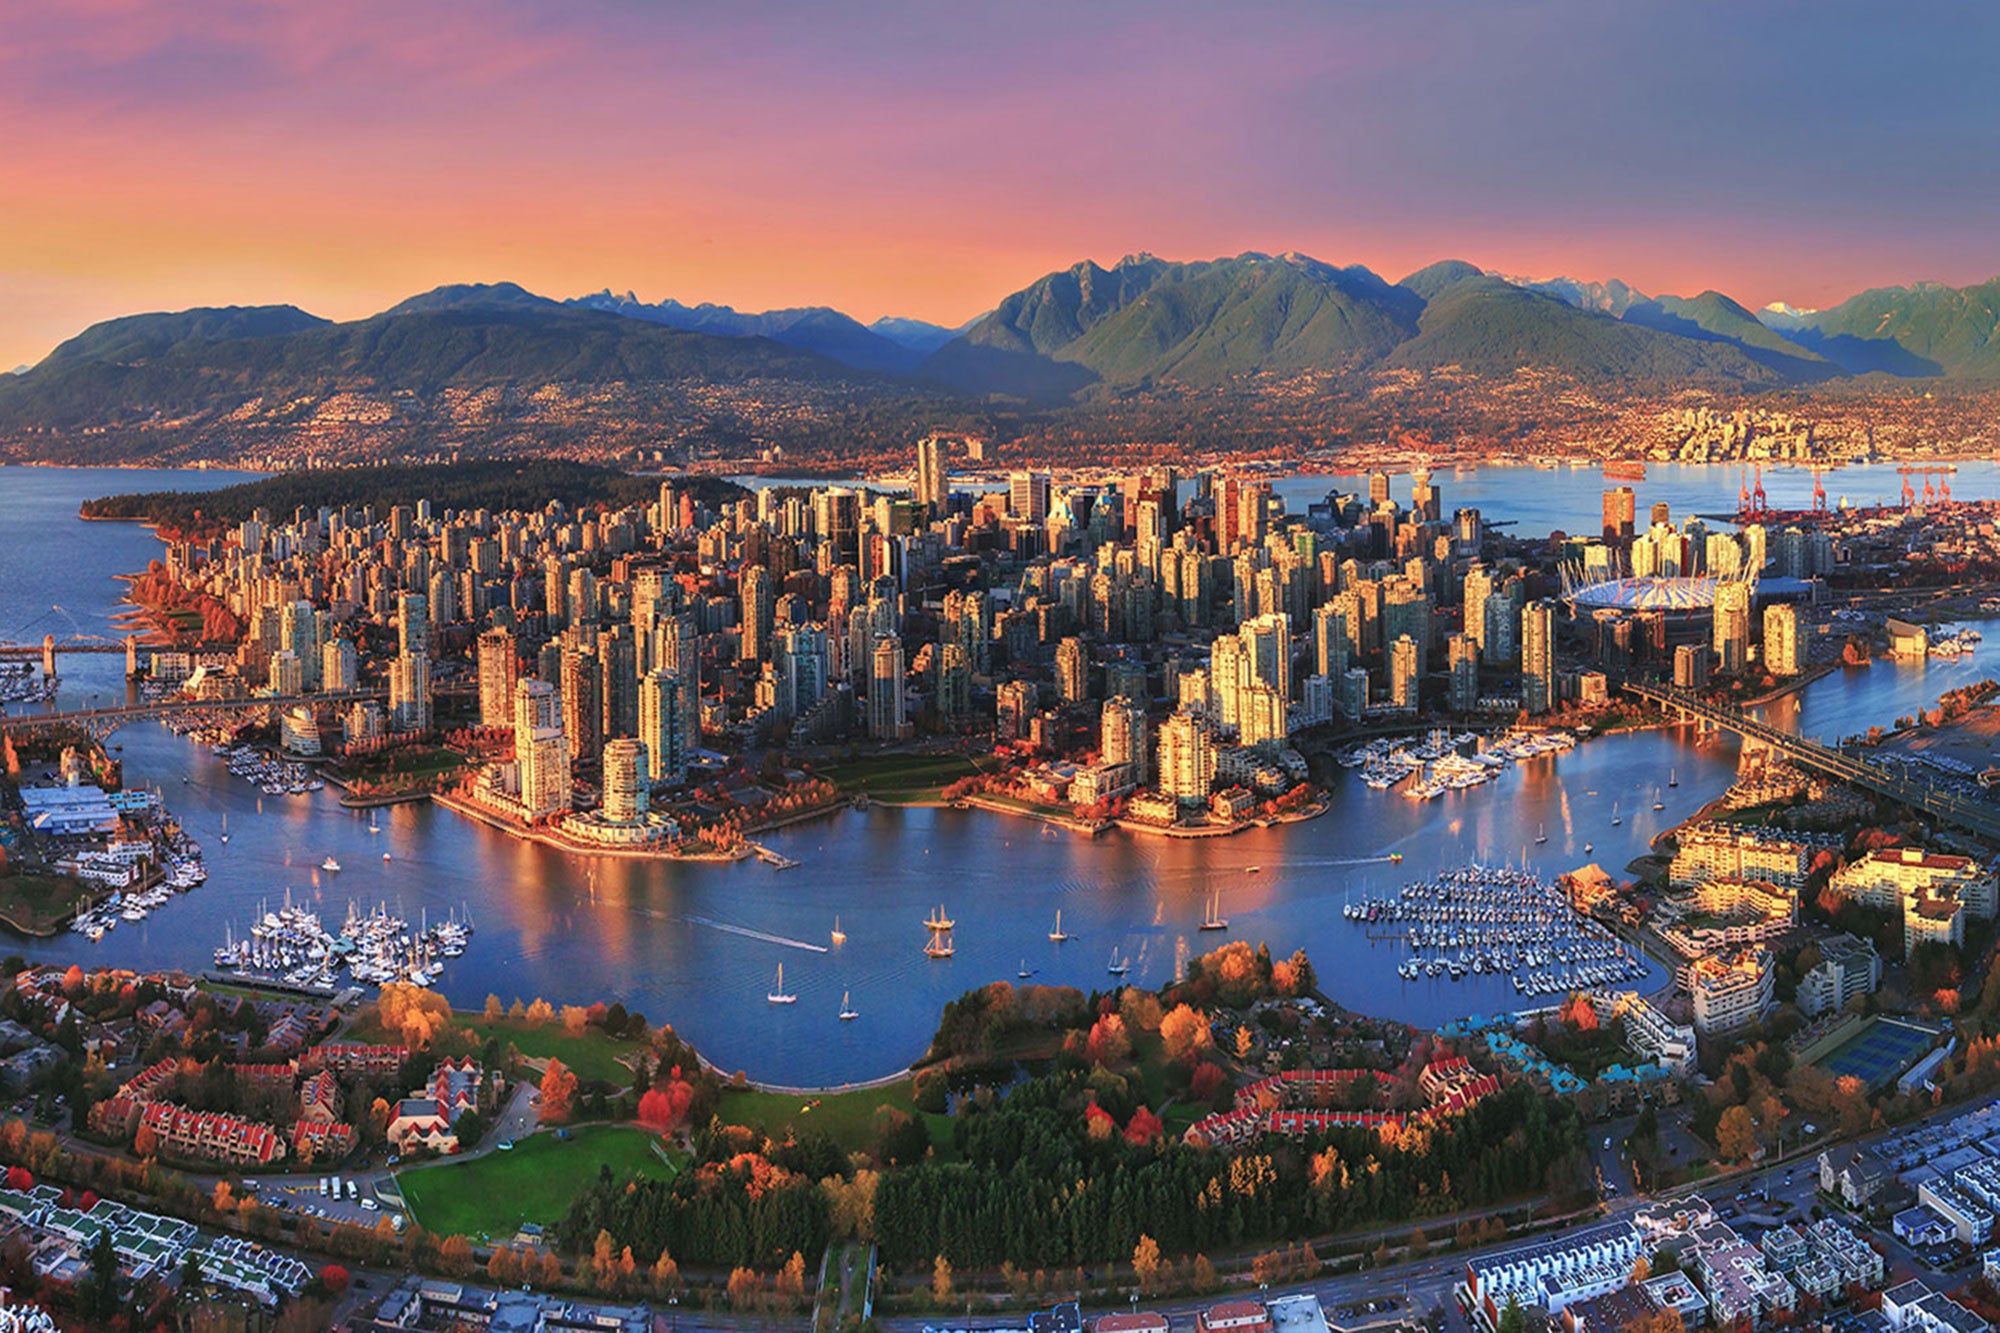 Our Vancouver Guide - Sites in the City